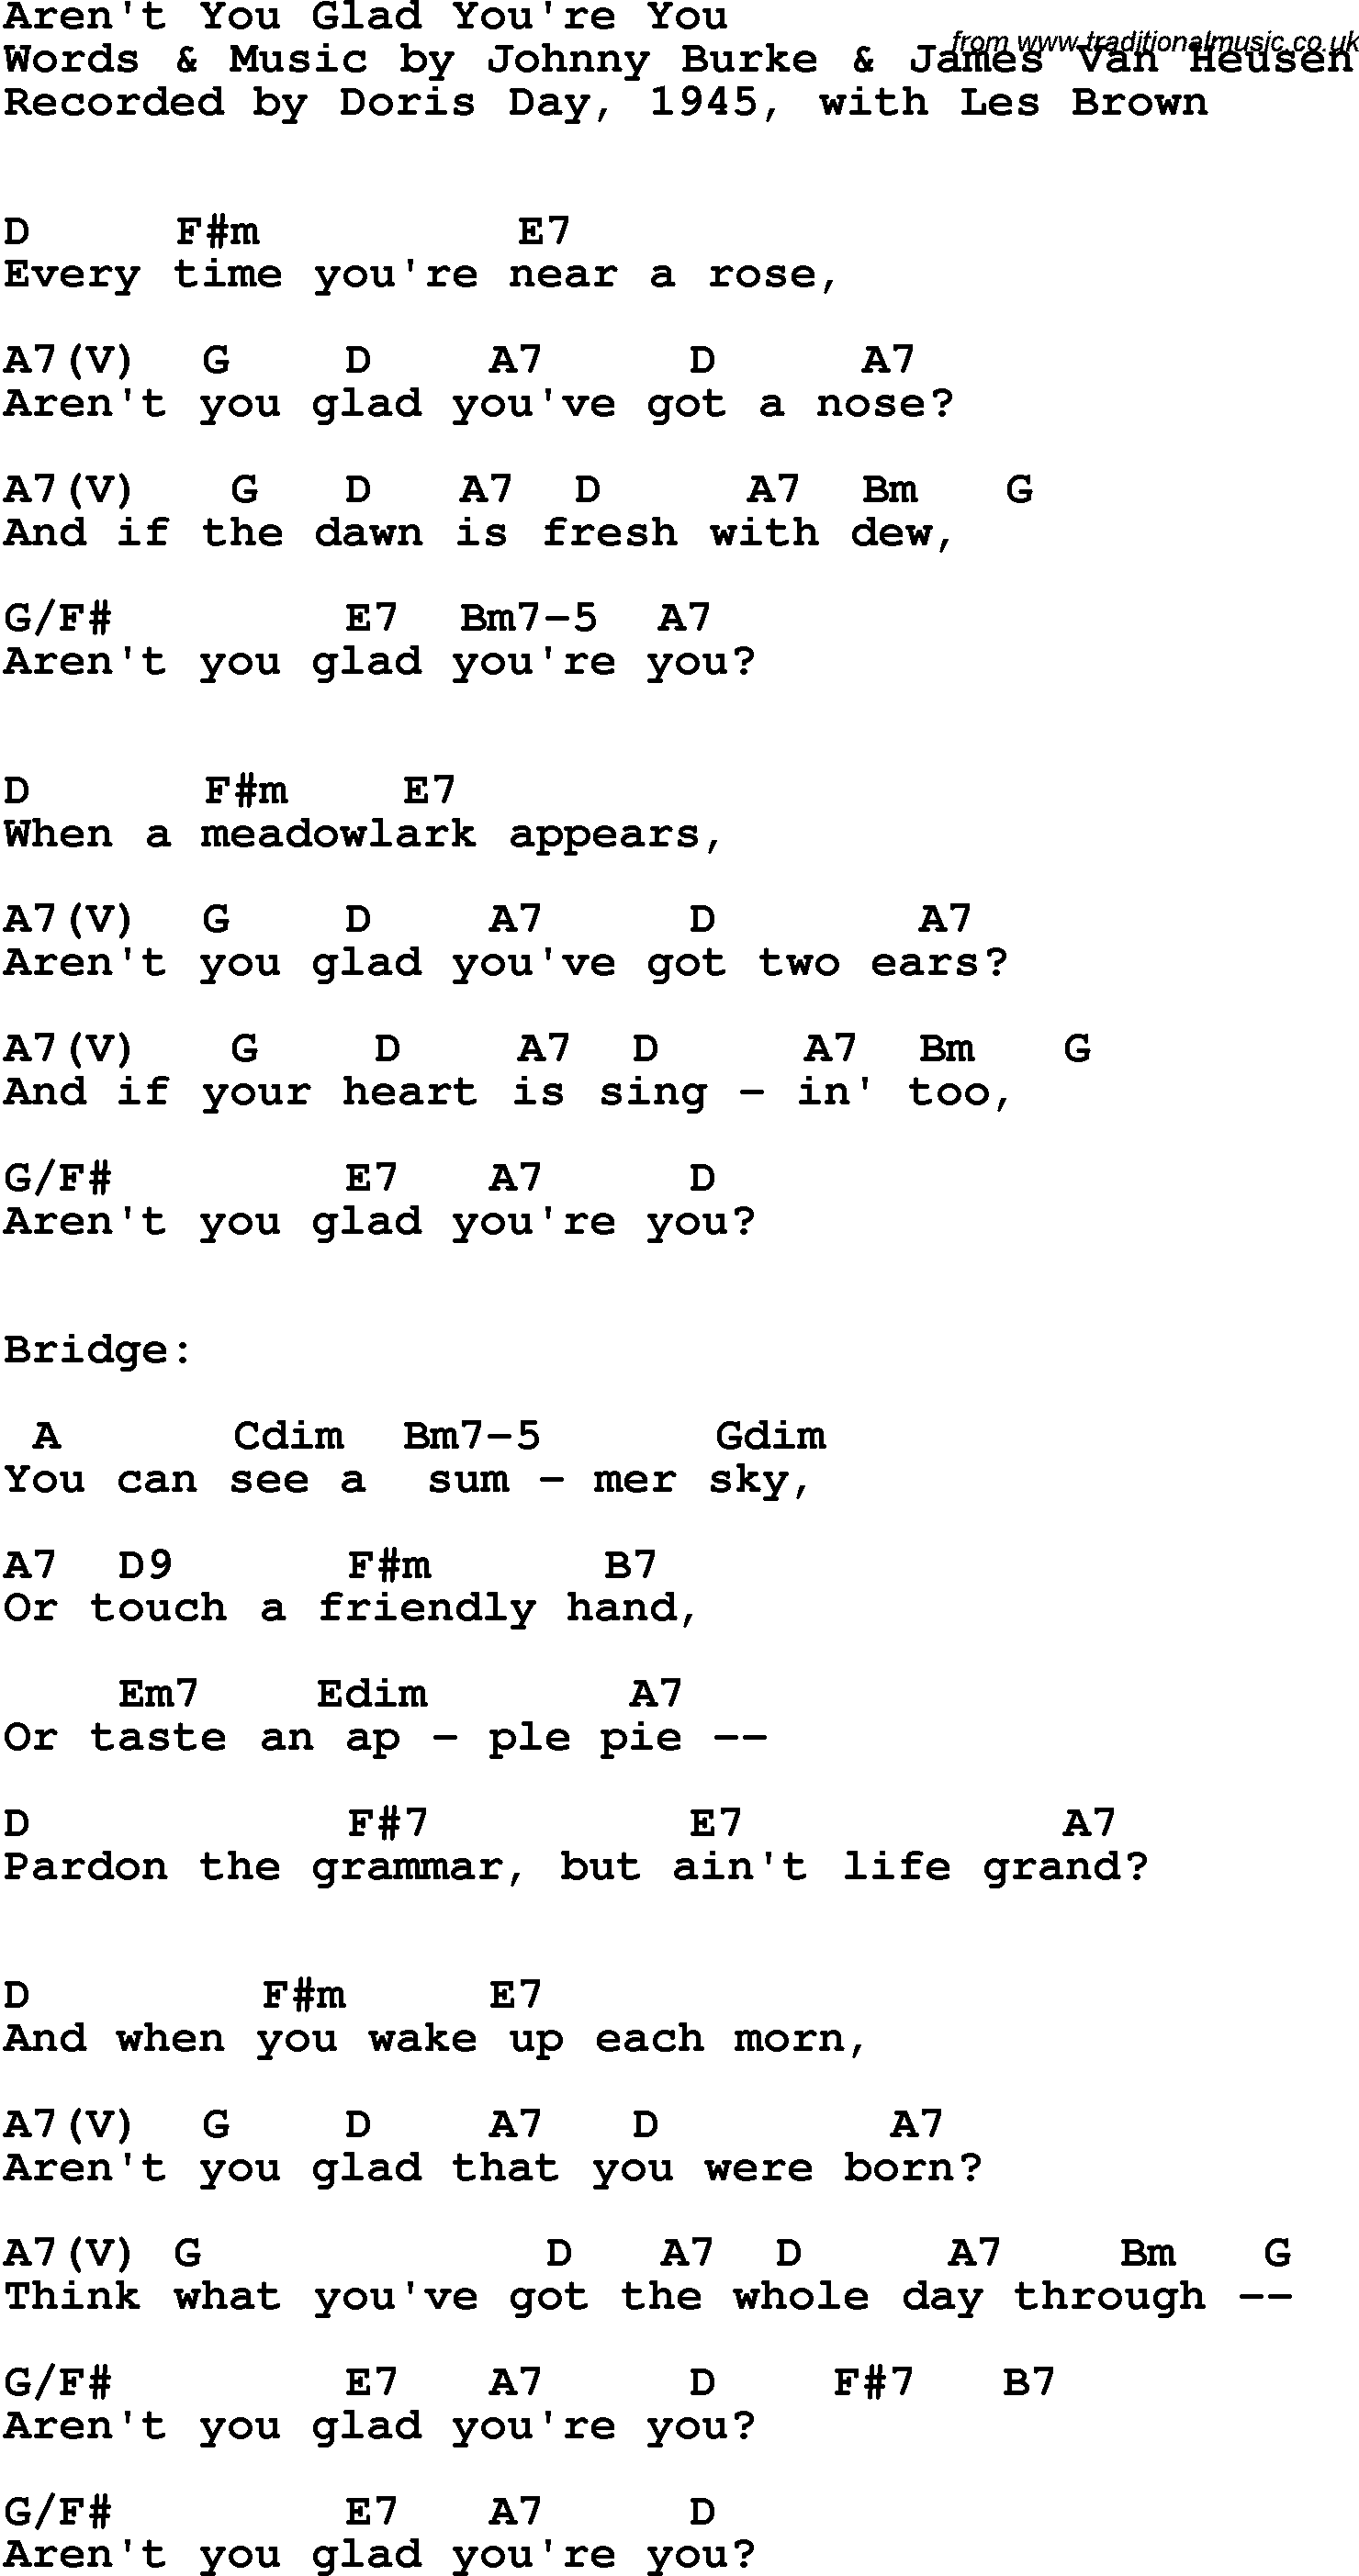 Song Lyrics with guitar chords for Aren't You Glad You're You - Doris Day, 1945, With Les Brown